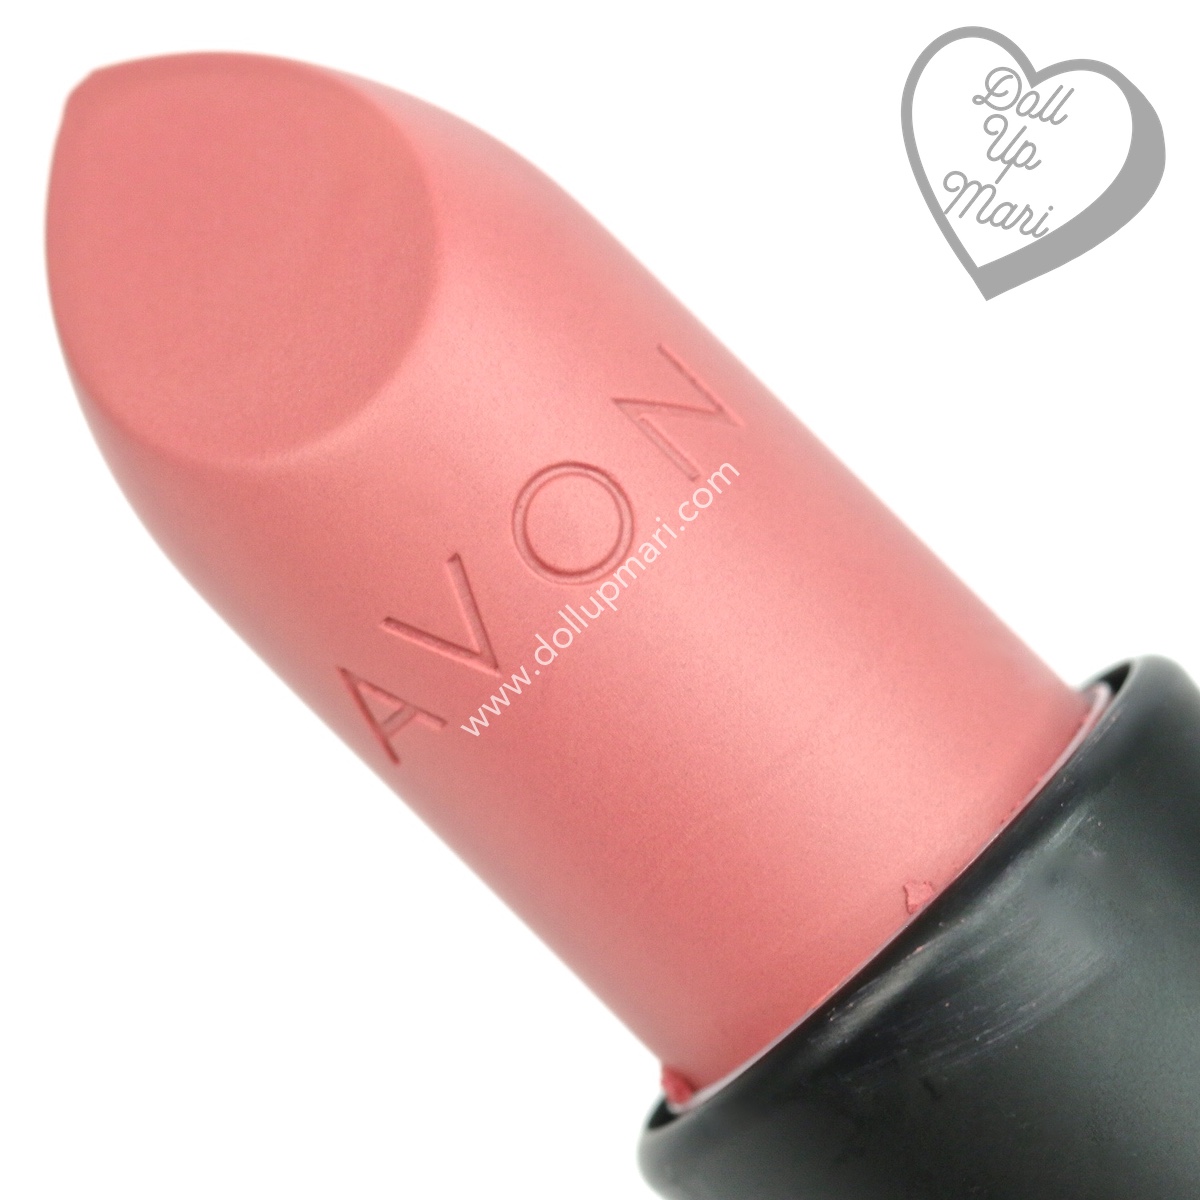 zoom in of Pure Pink shade of AVON Perfectly Matte Lipstick